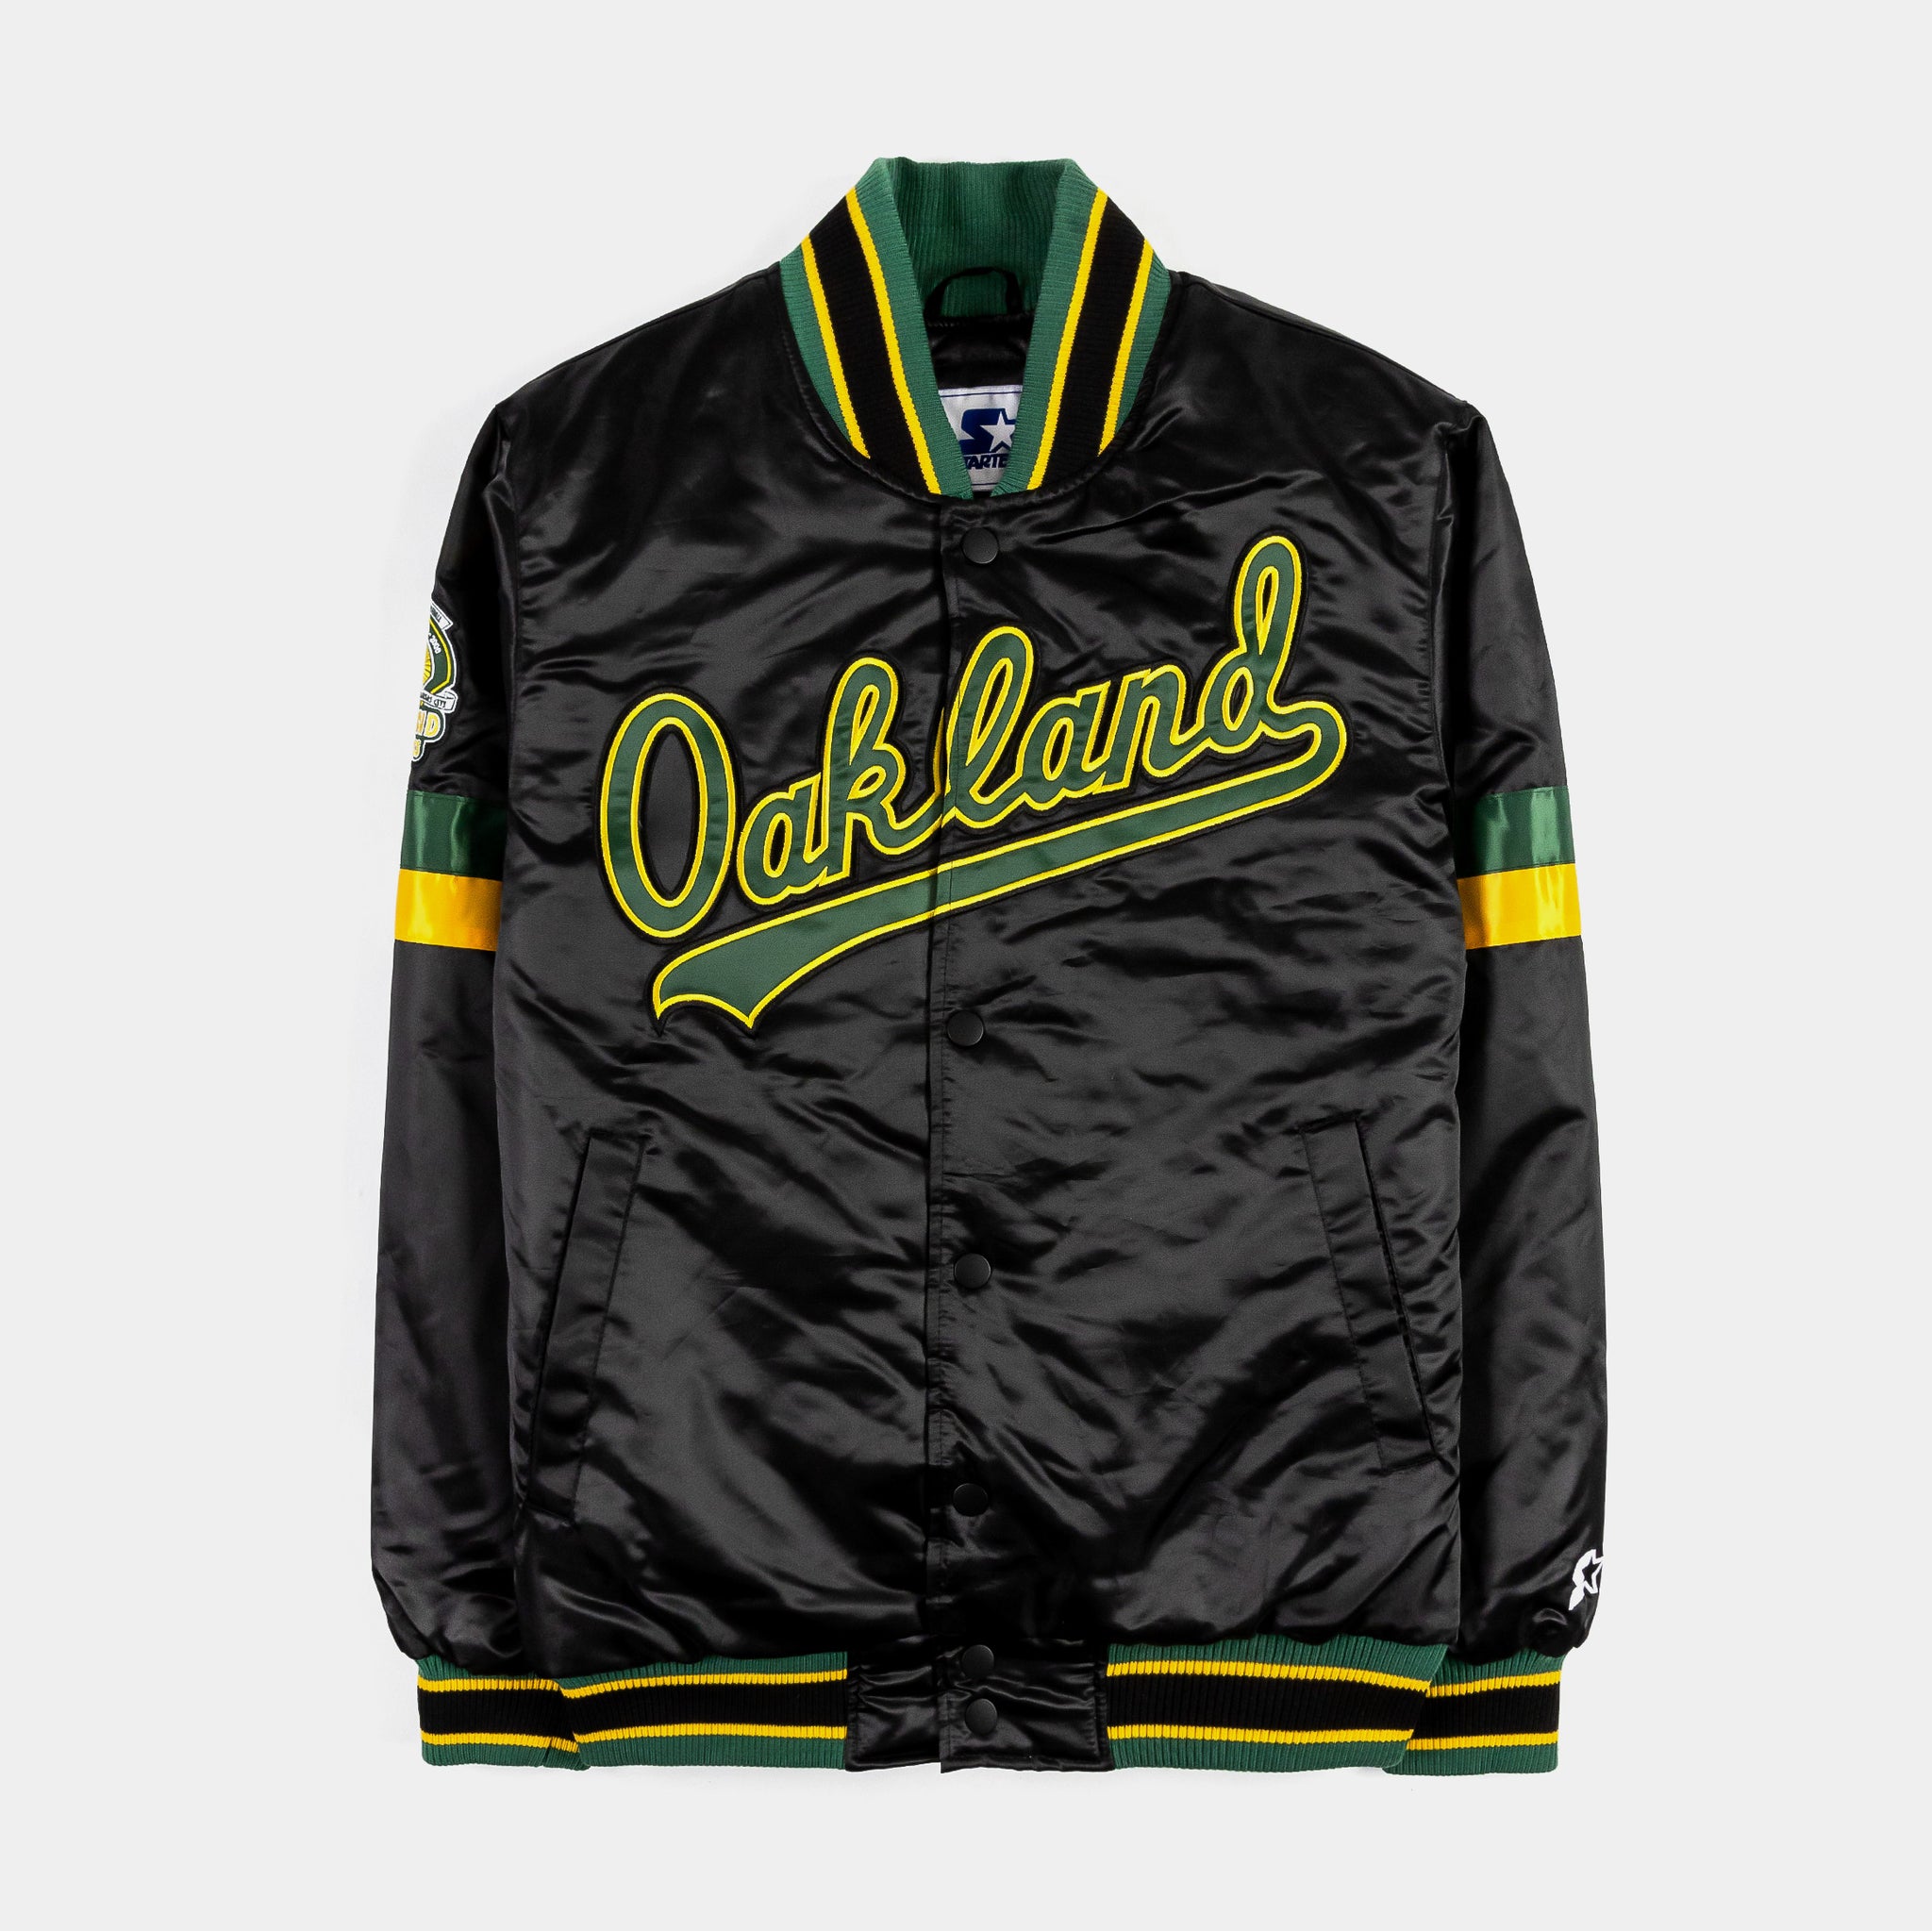 MLB Oakland Athletics Letterman Off White and Green Jacket